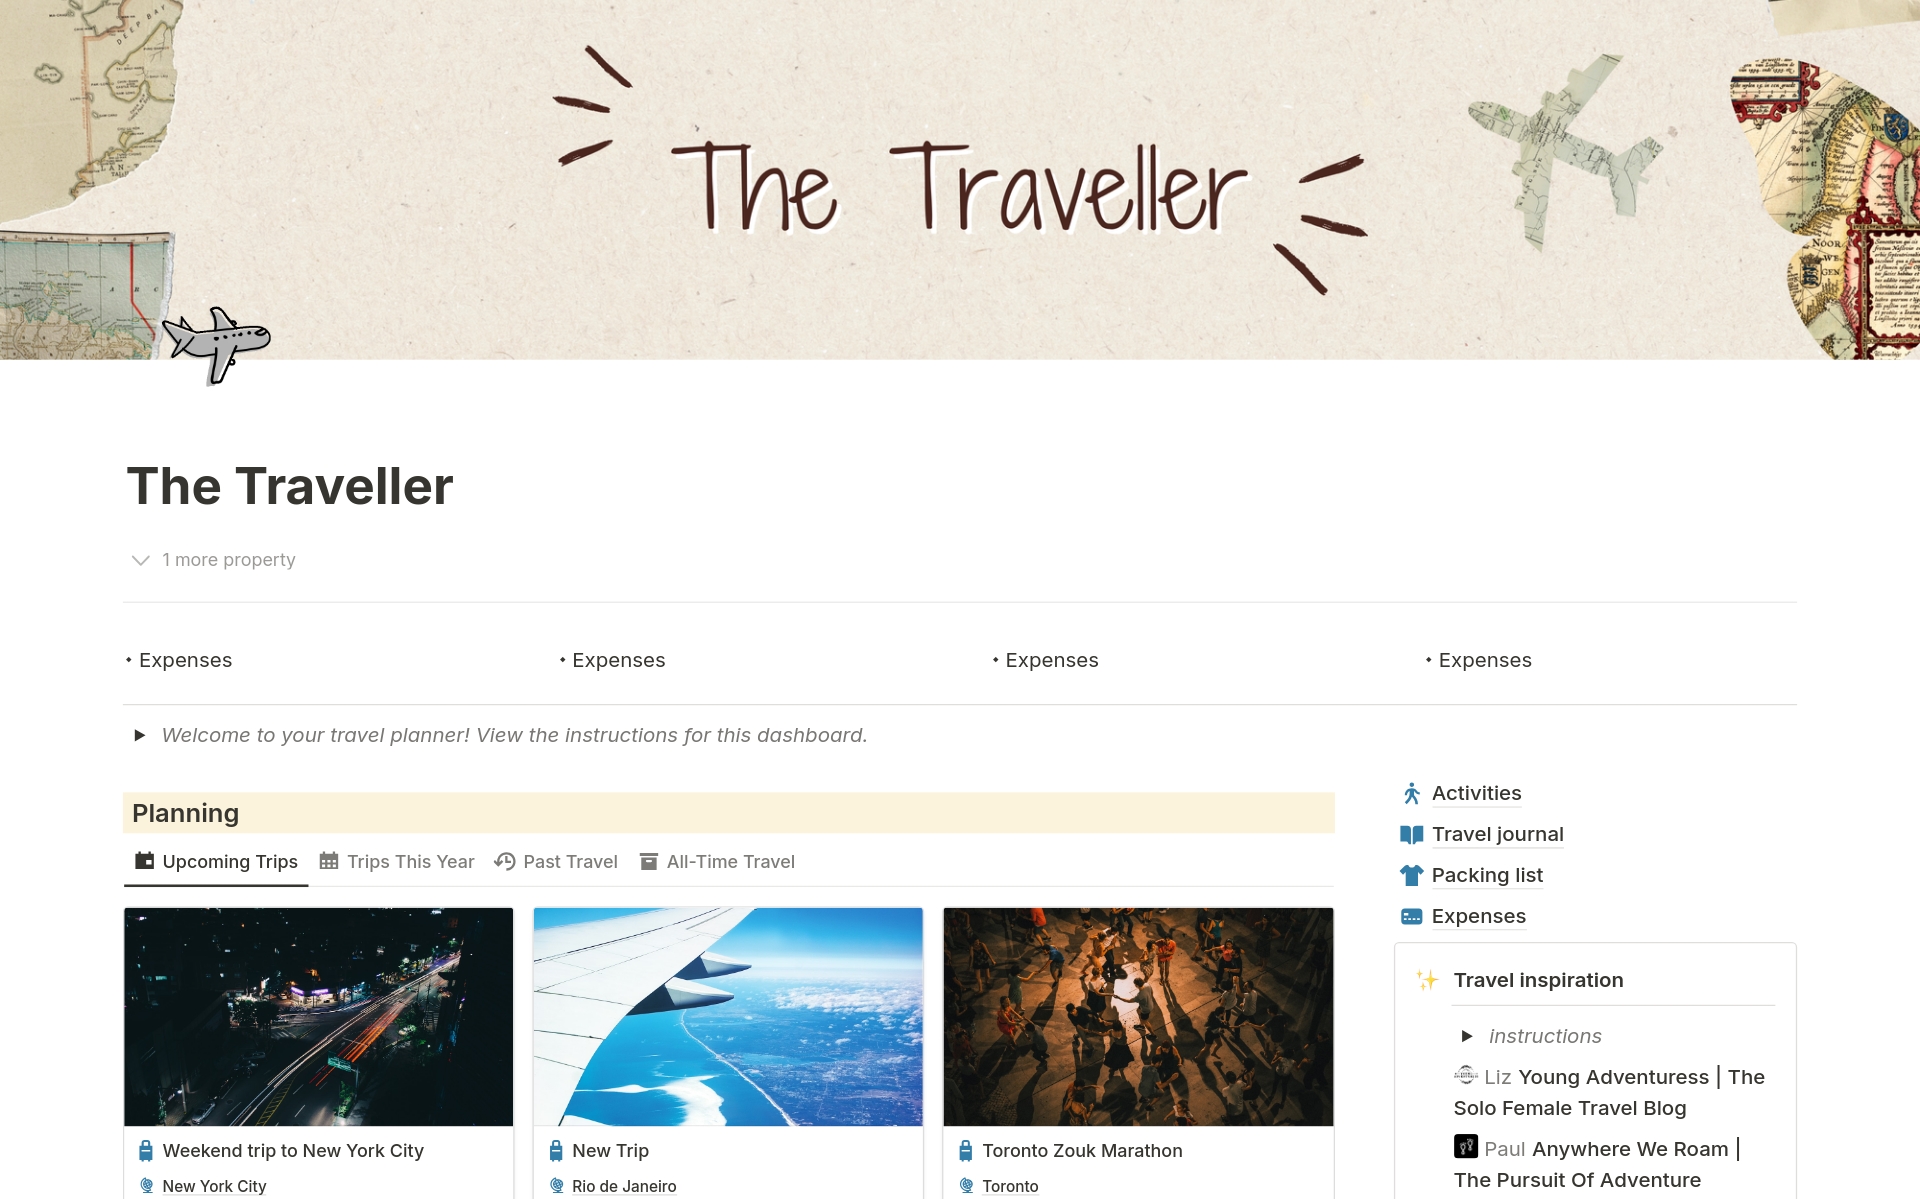 This travel planner is for detail oriented and tech-savvy Notion power users, who want to track their spending, intentionally plan their travel itineraries to a T, and document their bucket list and travels throughout life.